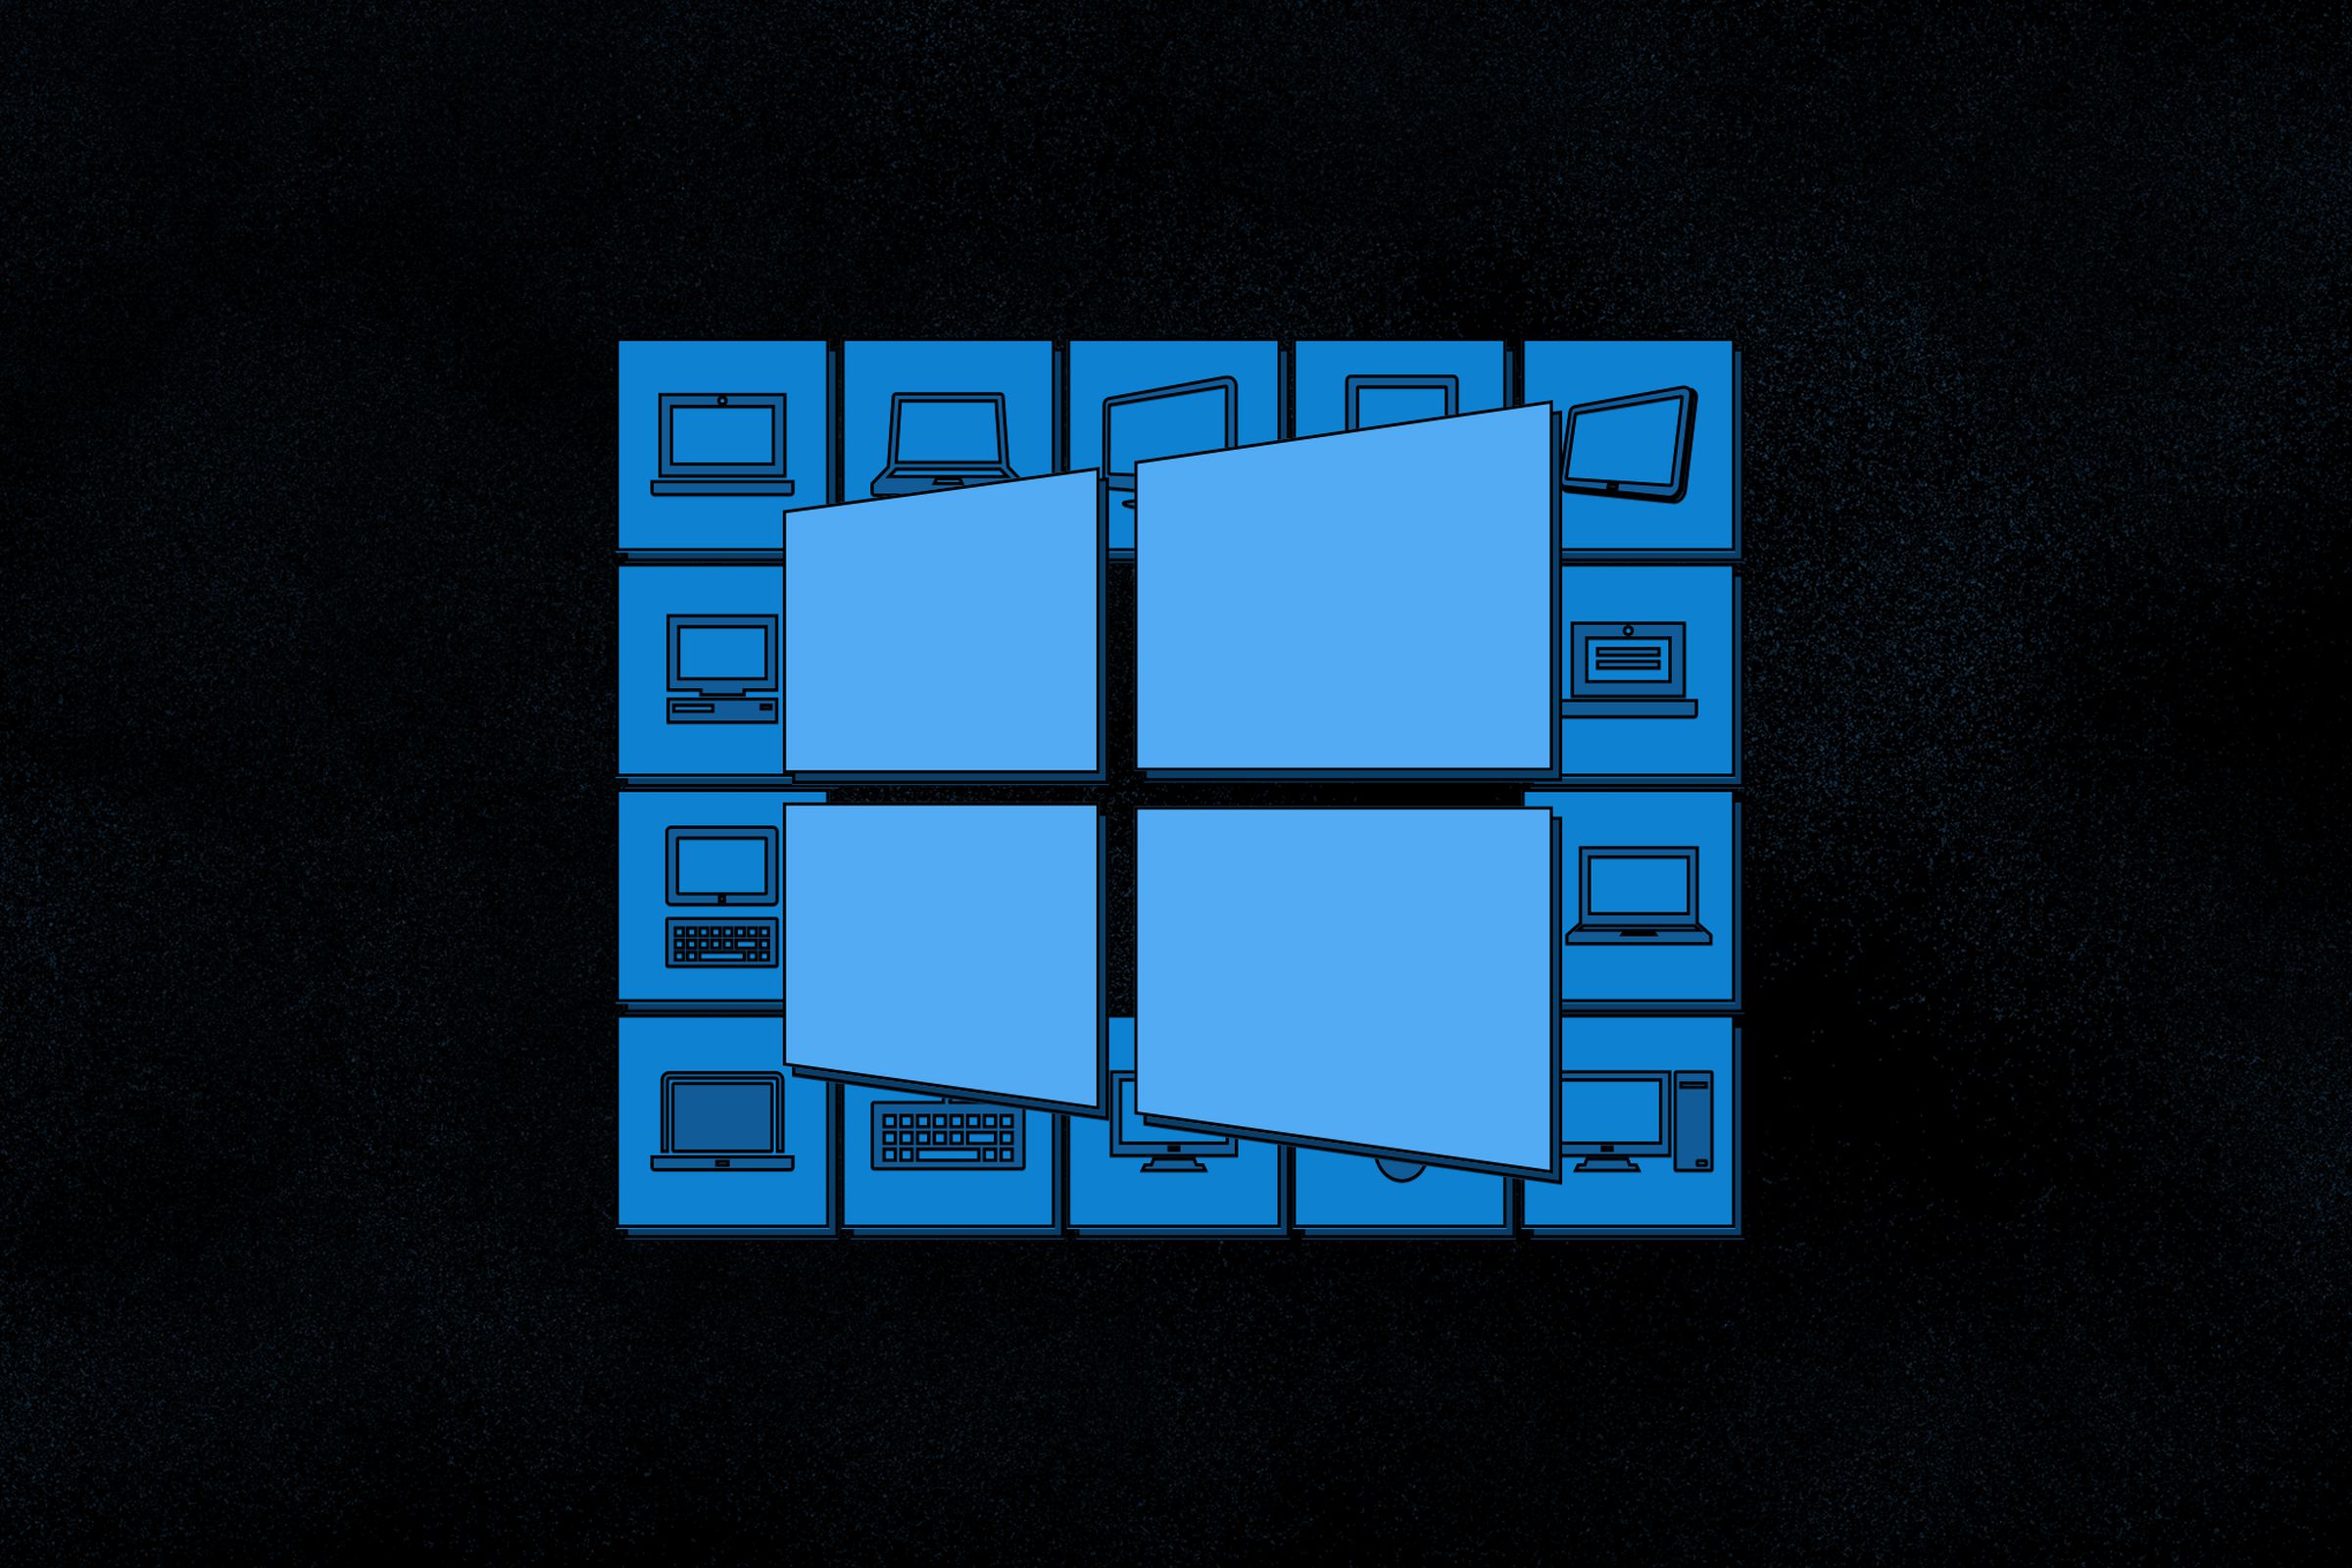 A picture of the Windows logo on a background of squares with various glyphs that look like computers.